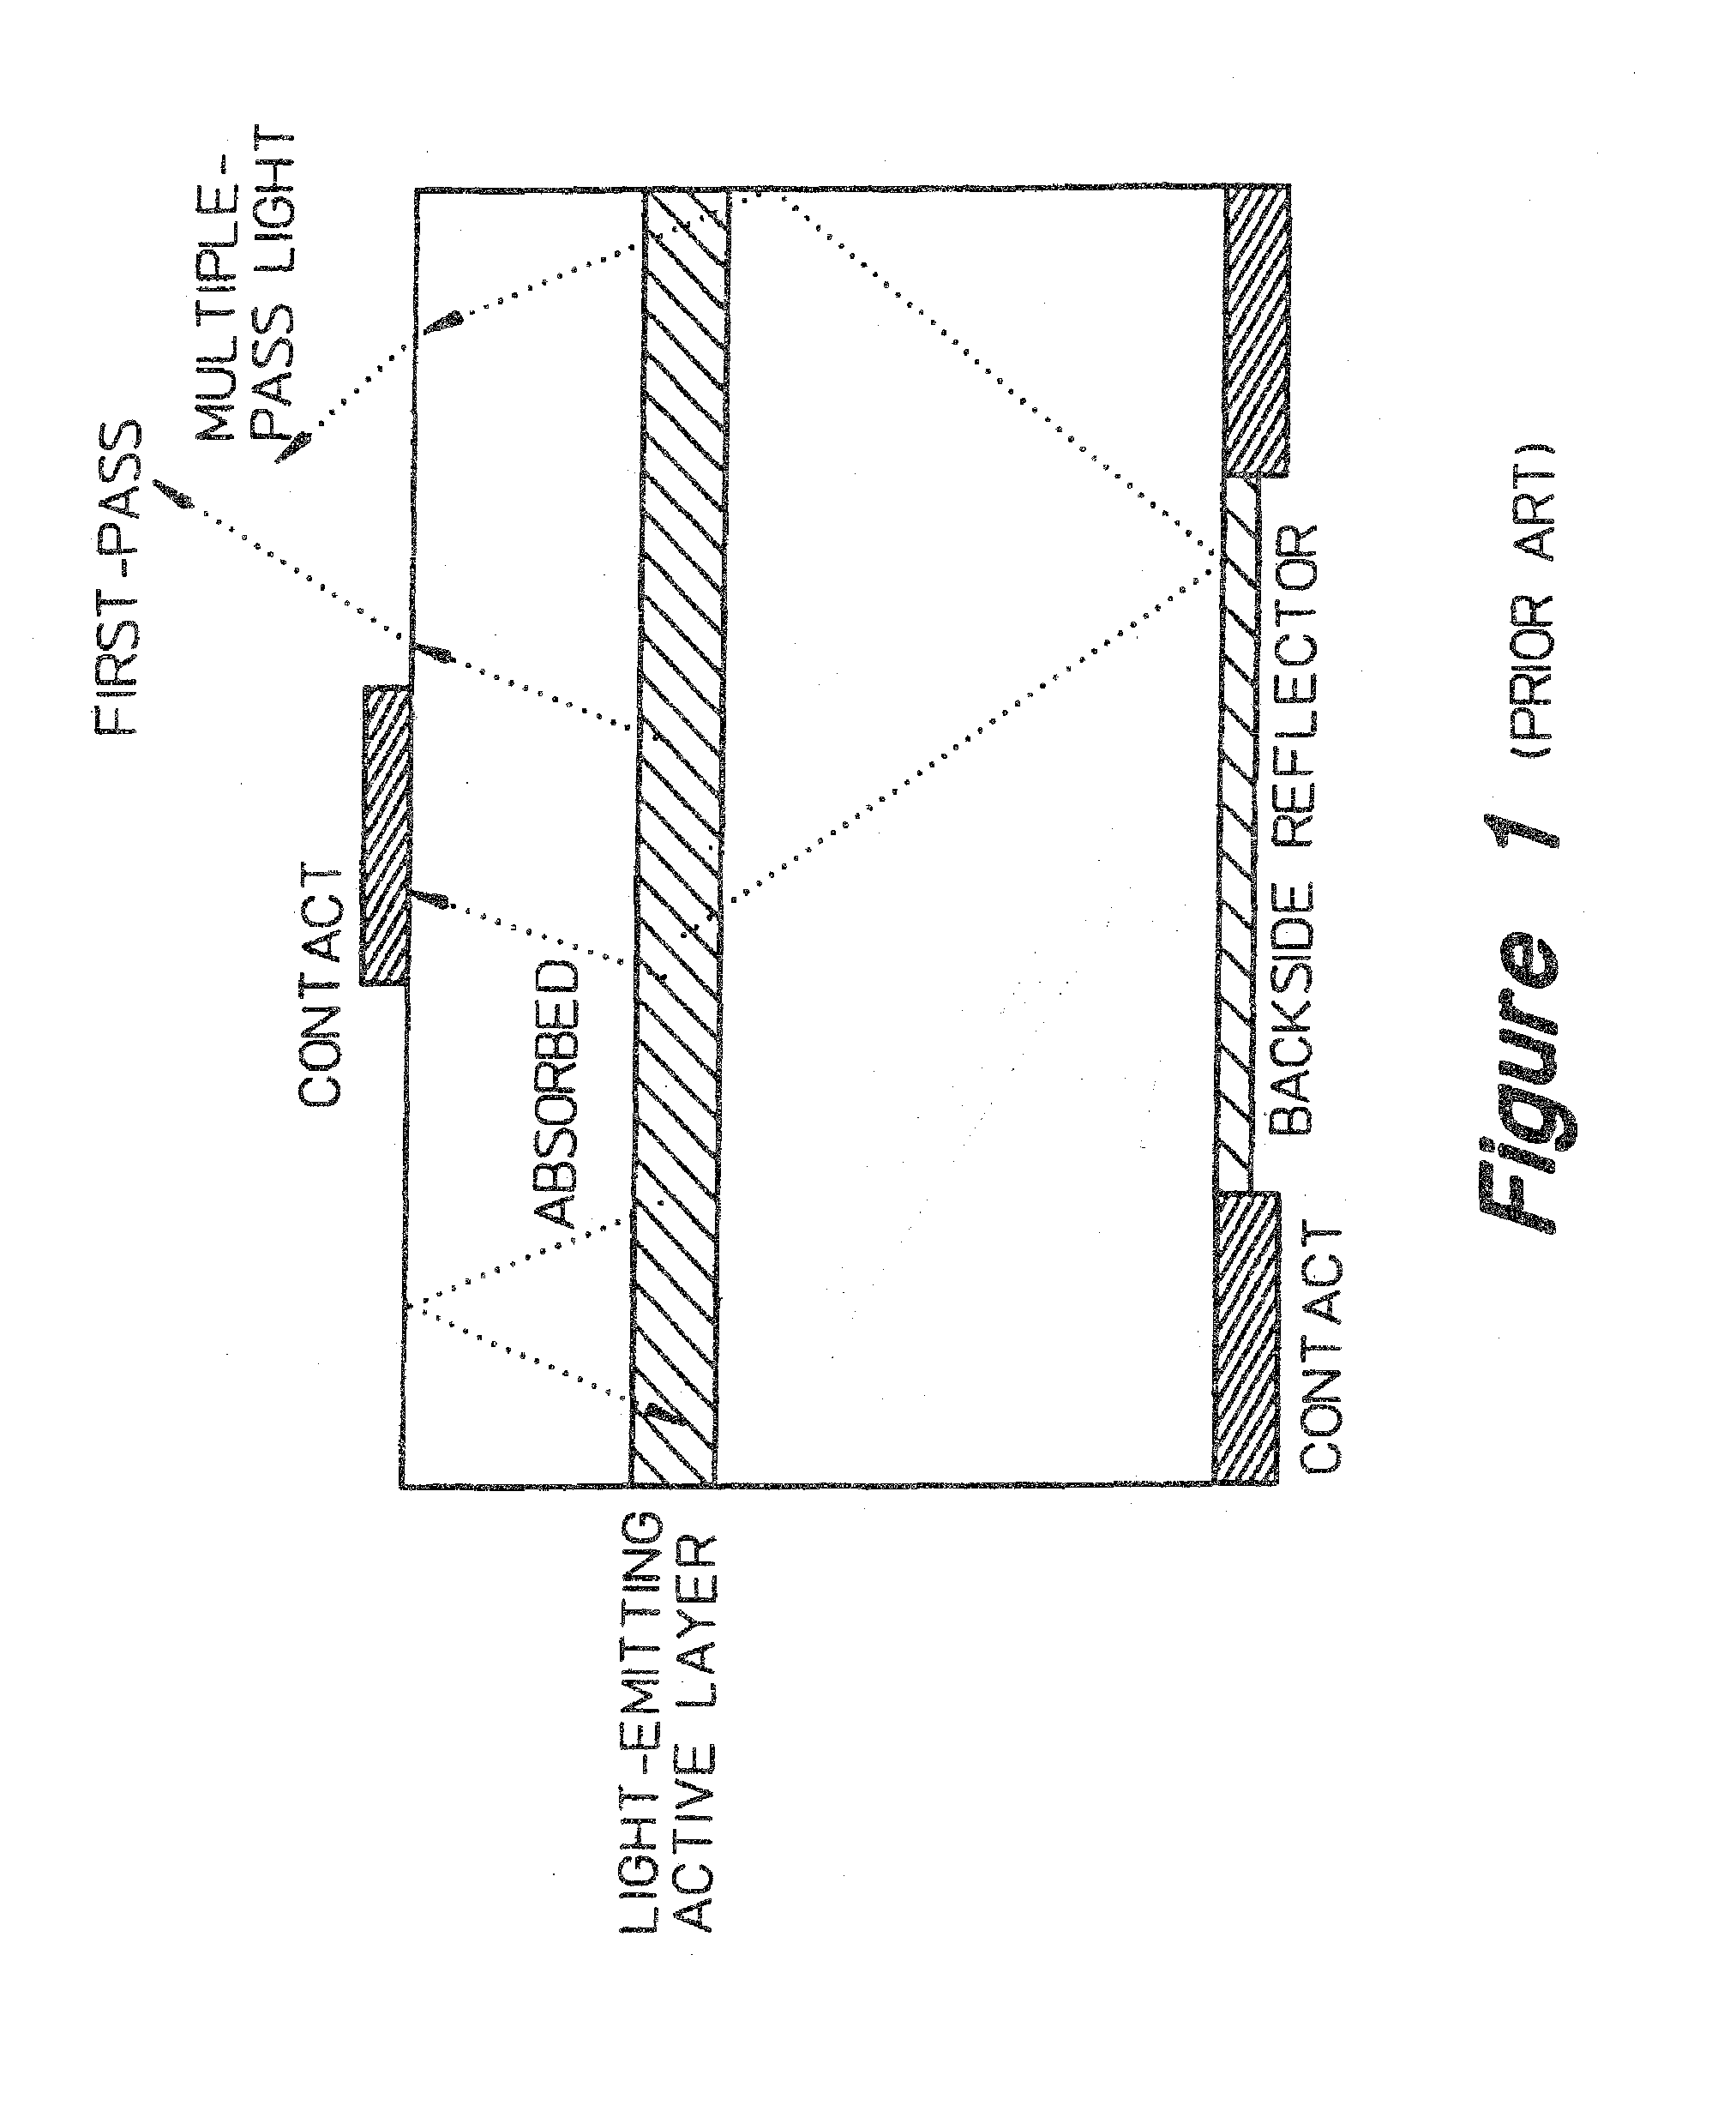 Light extraction from a semiconductor light emitting device via chip shaping